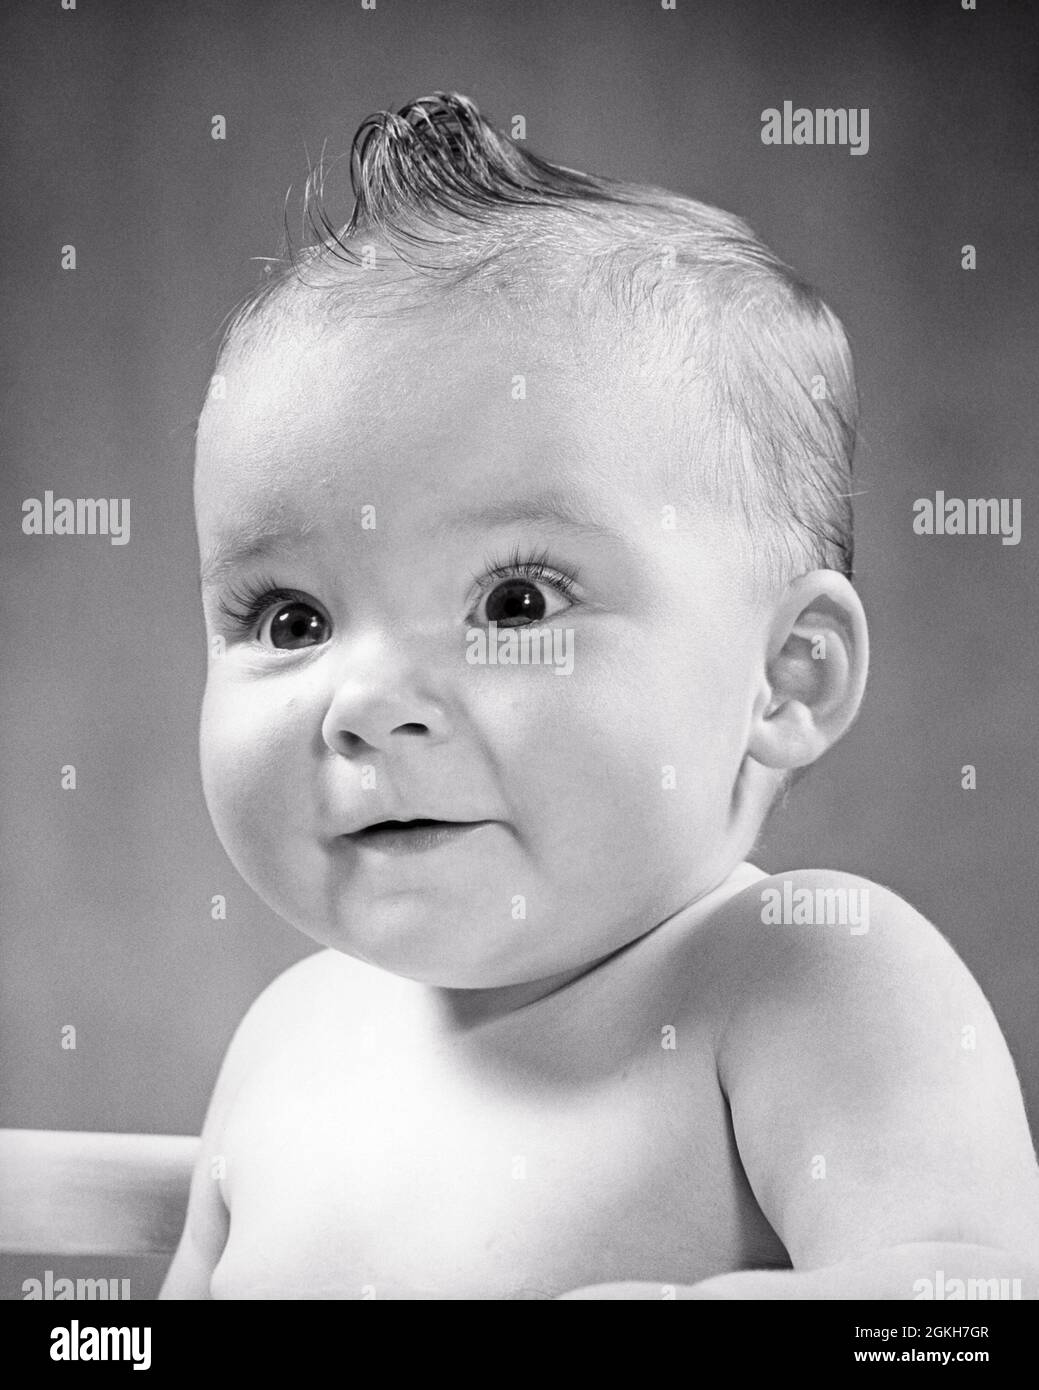 1950s WIDE-EYED BABY GIRL WITH EXCITED INTERESTED CURIOUS FACIAL EXPRESSION LOOKING OFF CAMERA - b6344 HAR001 HARS LIFESTYLE FEMALES HEALTHINESS HOME LIFE EXPRESSIONS B&W WIDE BUG-EYED HUMOROUS HAPPINESS WELLNESS HEAD AND SHOULDERS CHEERFUL EXCITEMENT COMICAL ANTICIPATION AWAKE SMILES CONCEPTUAL ALERT COMEDY CURIOUS JOYFUL INTERESTED WIDE-EYED CHARMING GROWTH JUVENILES STARTLED BABY GIRL BLACK AND WHITE CAUCASIAN ETHNICITY HAR001 OLD FASHIONED Stock Photo